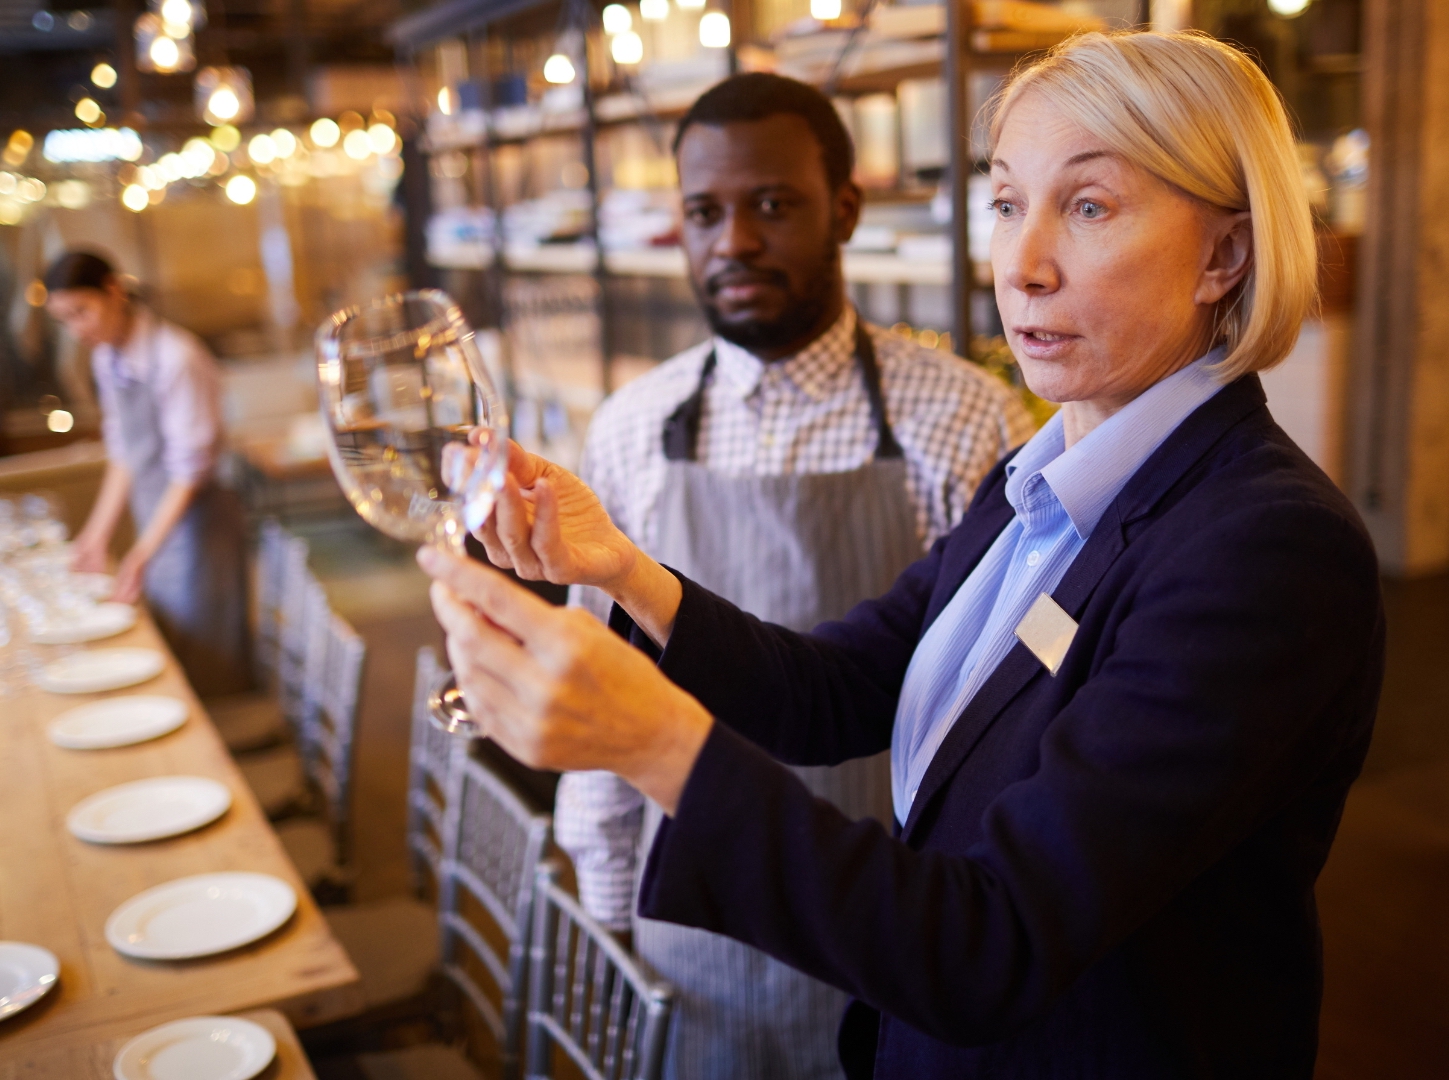 An old lady as head of restaurant complaints for the glass hygiene